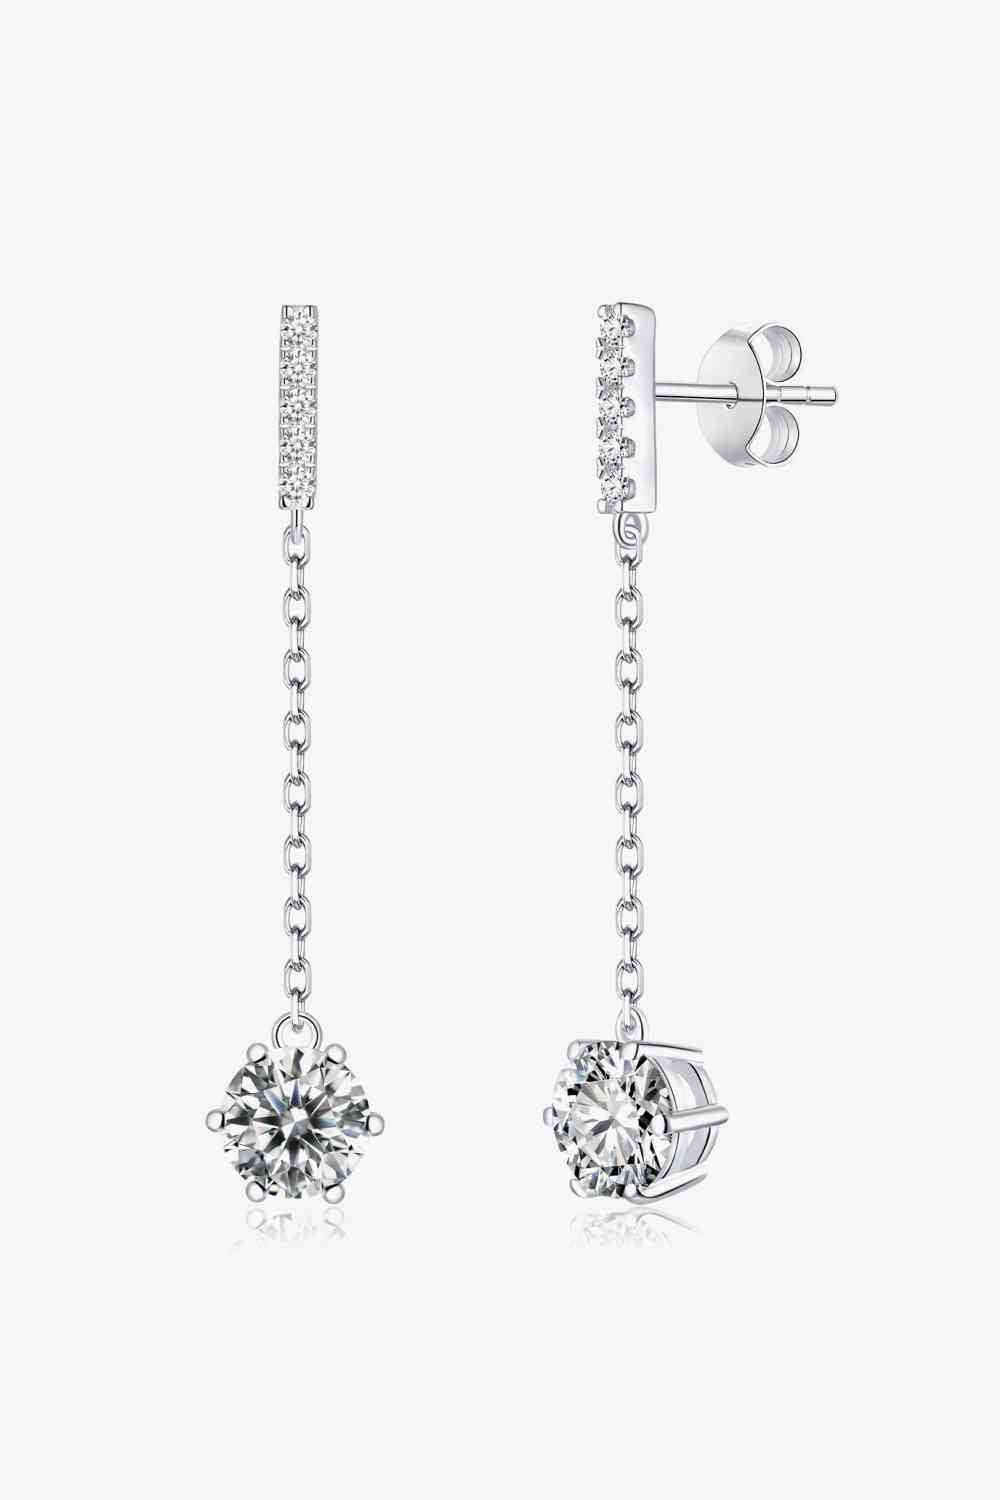 a pair of white gold earrings with a diamond